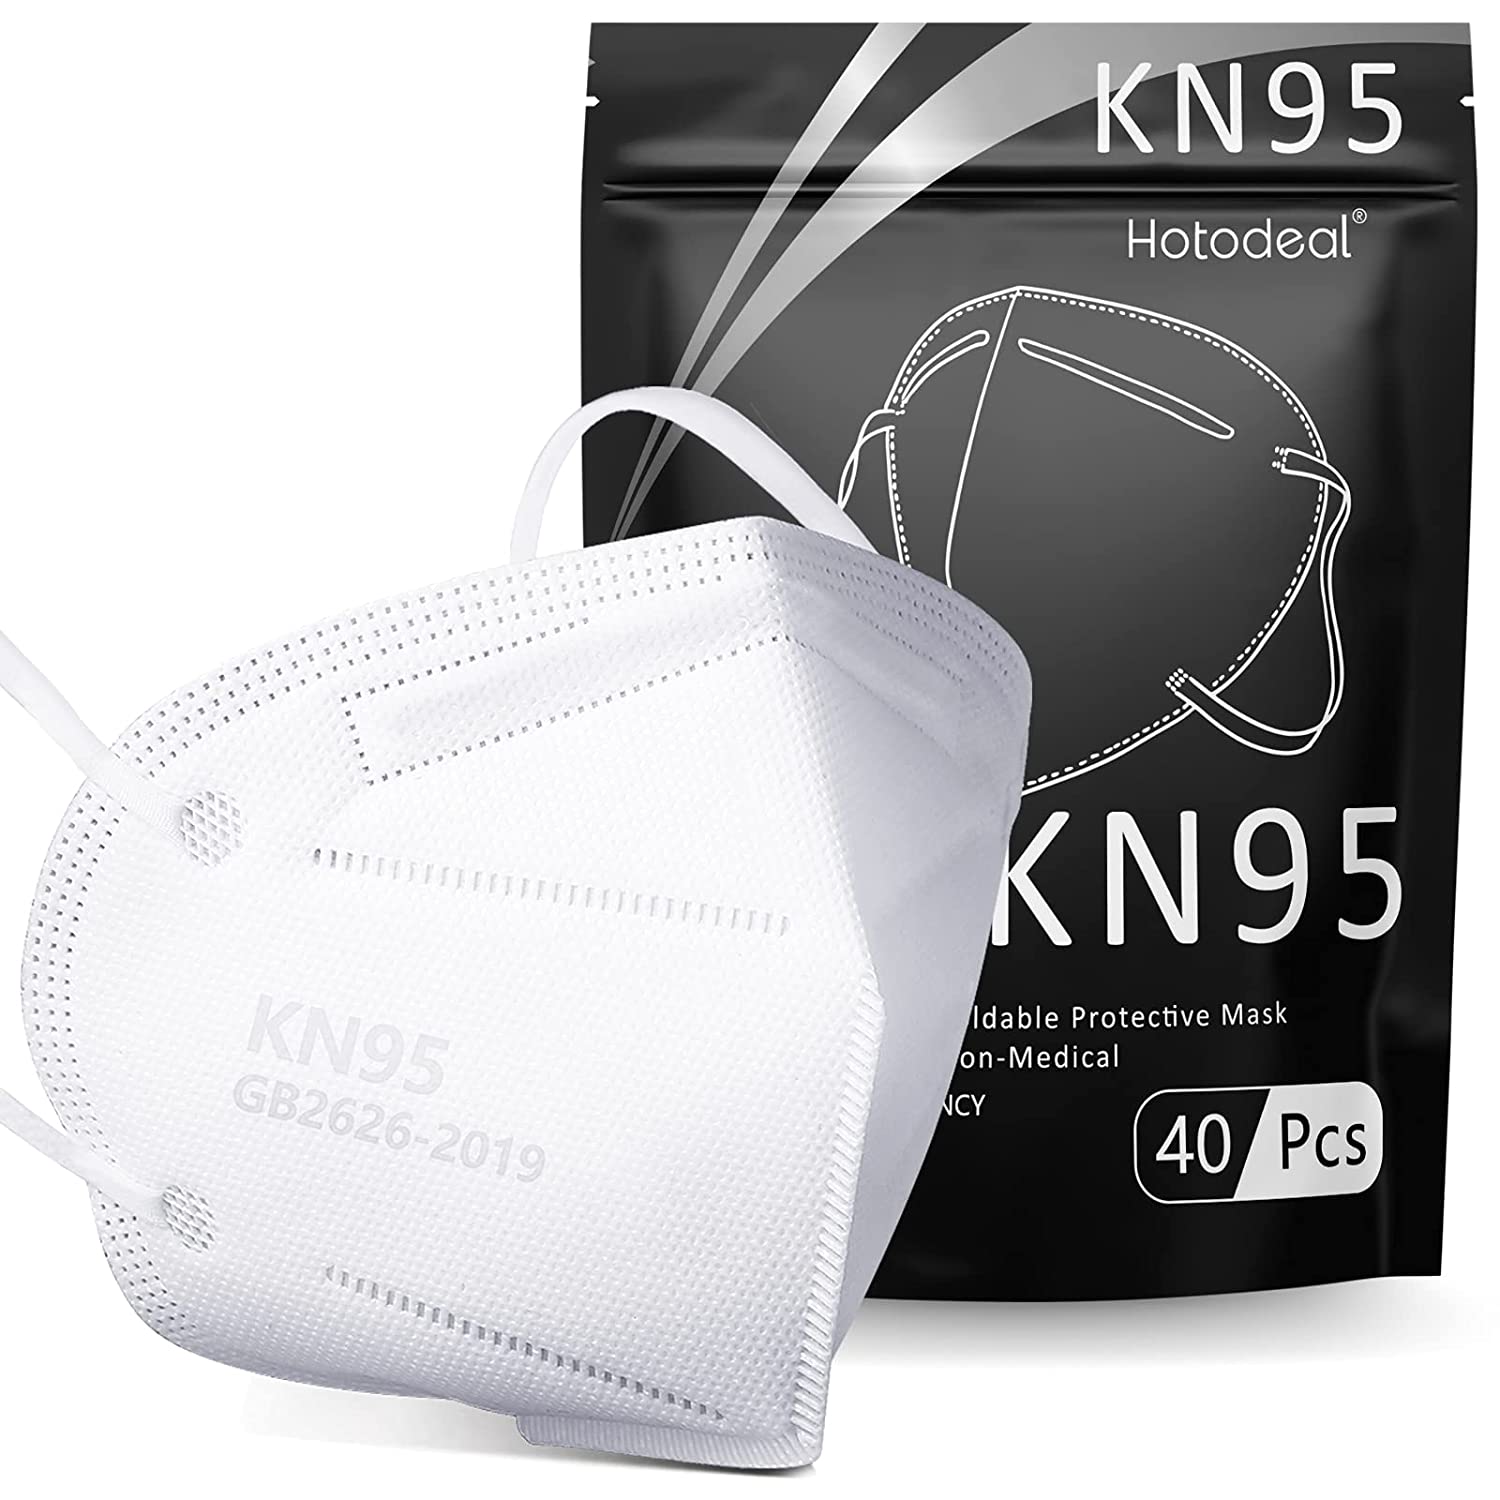 Hotodeal KN95 Face Mask 40 PCs, White for $10.80 plus tax at Amazon $10.78